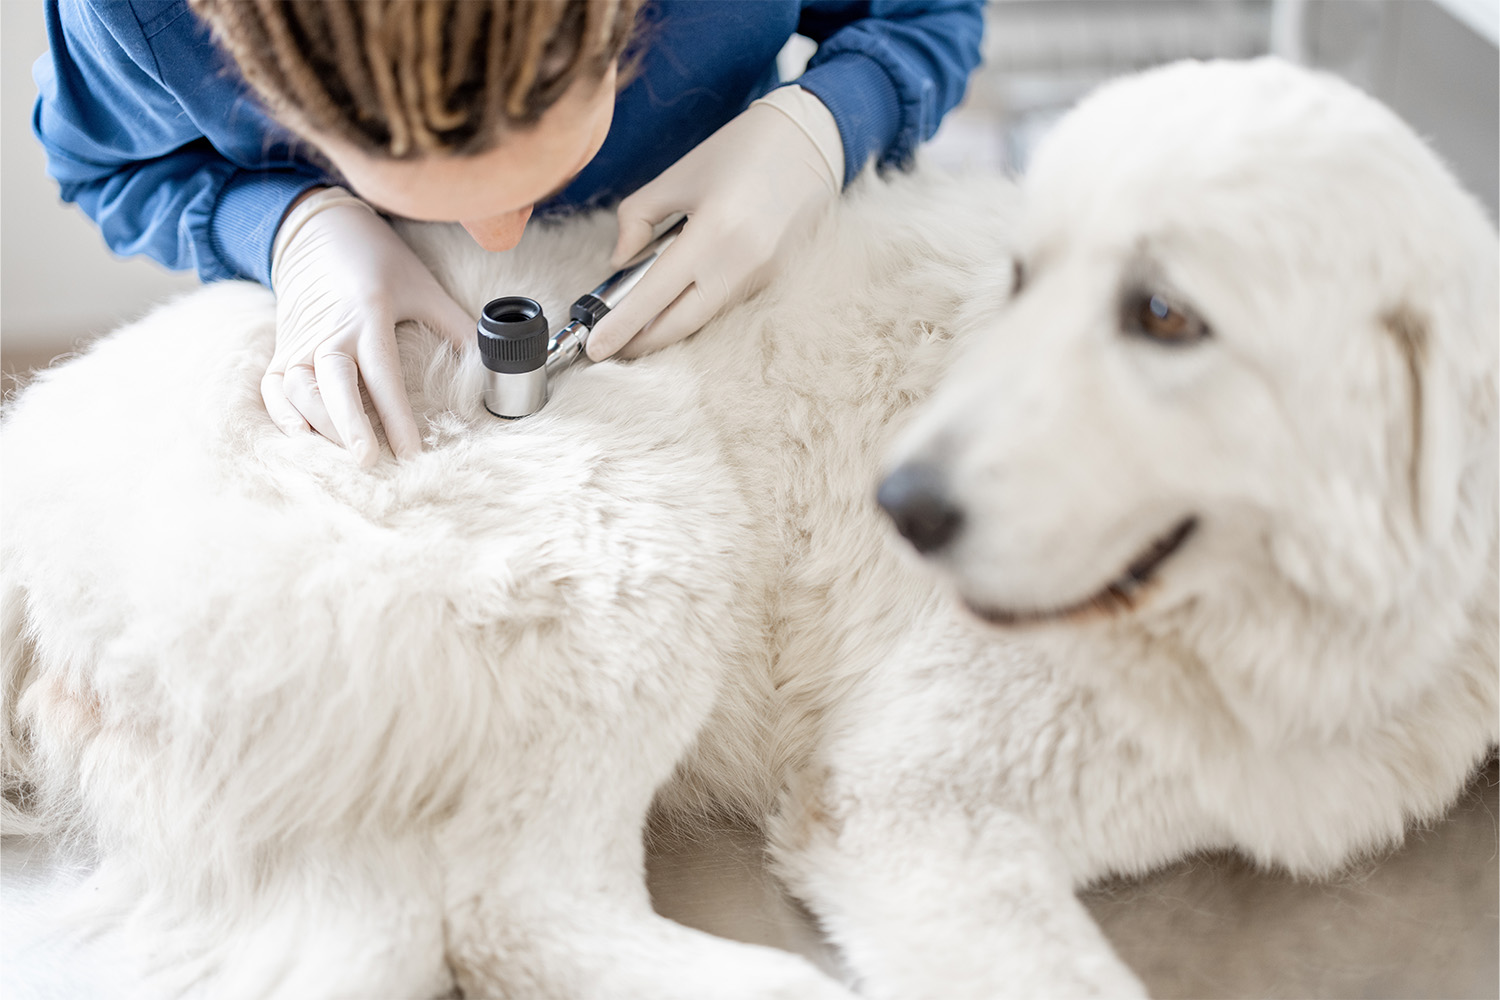 Black Spots on Dog's Skin: When To Worry